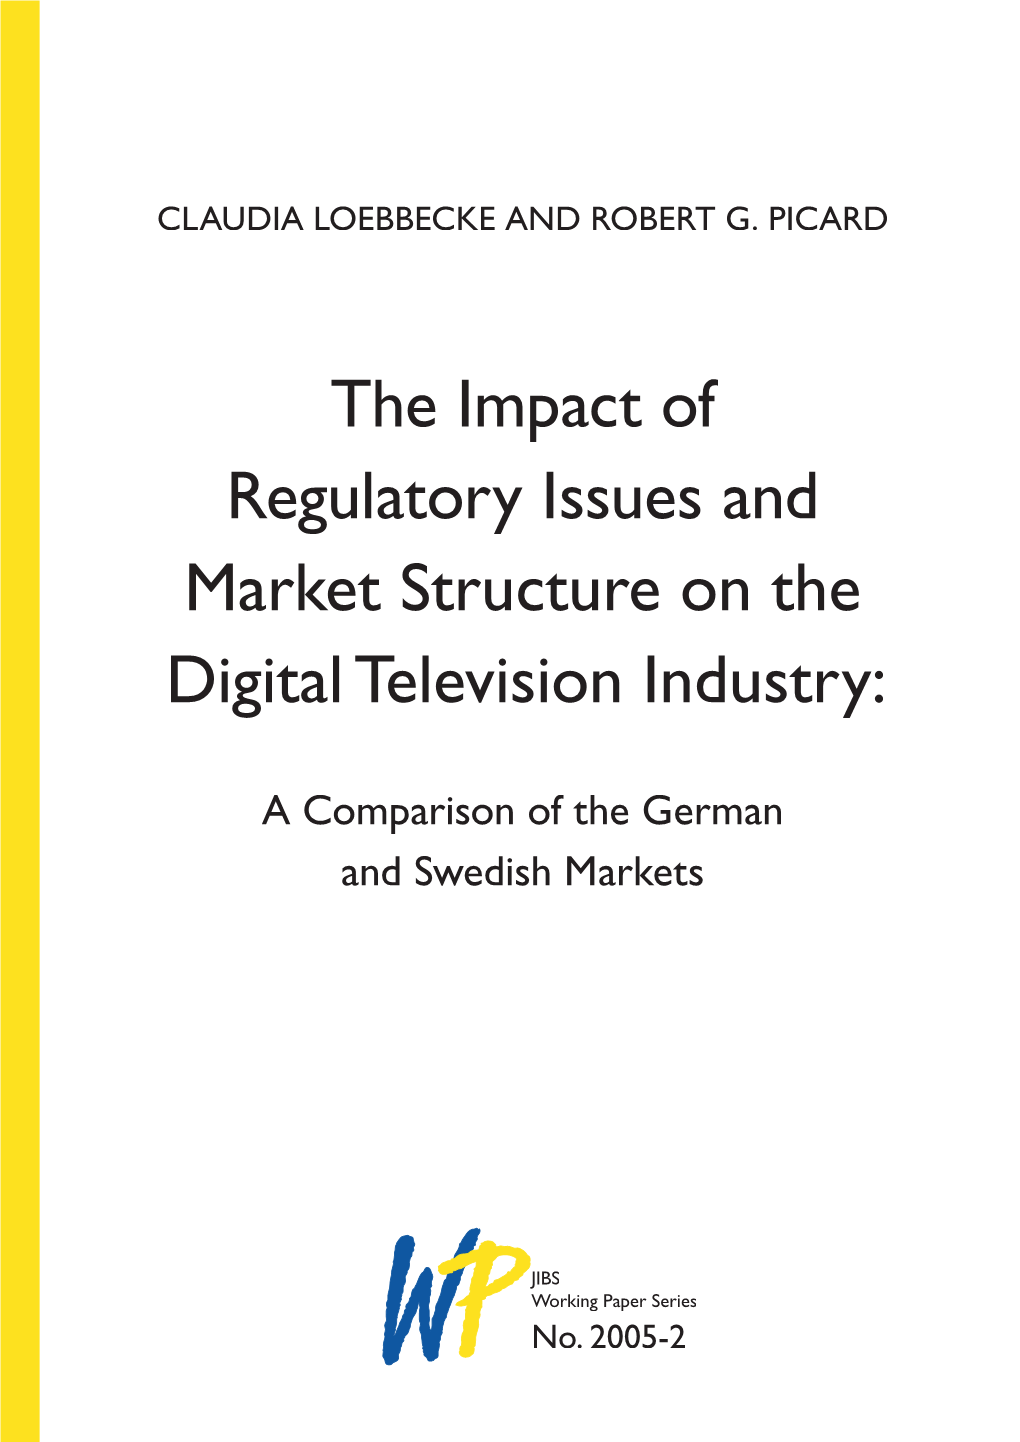 The Impact of Regulatory Issues and Market Structure on the Digital Television Industry